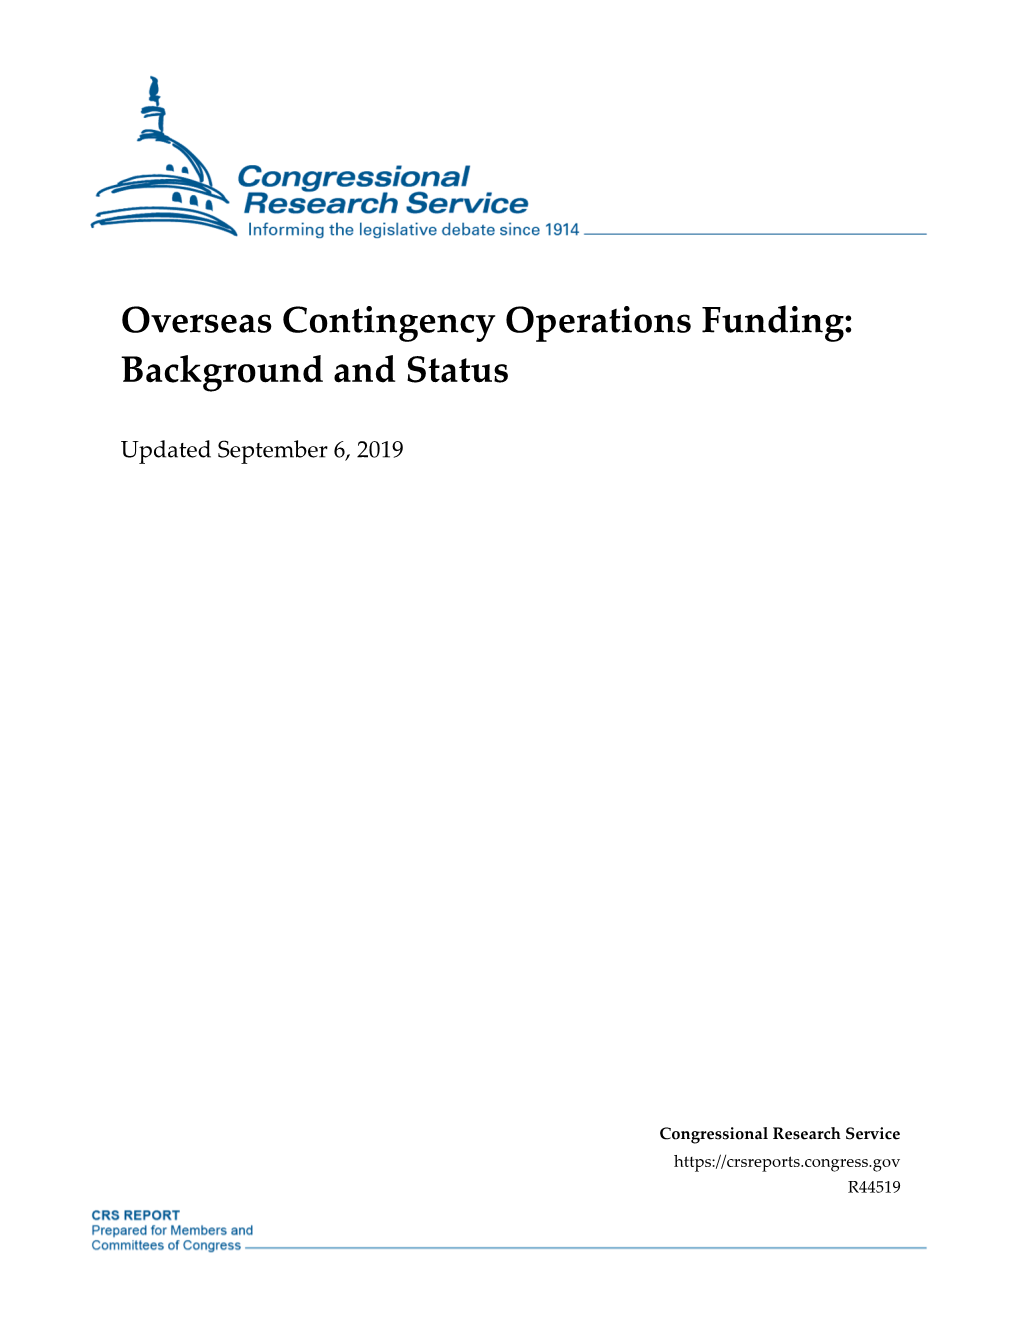 Overseas Contingency Operations Funding: Background and Status